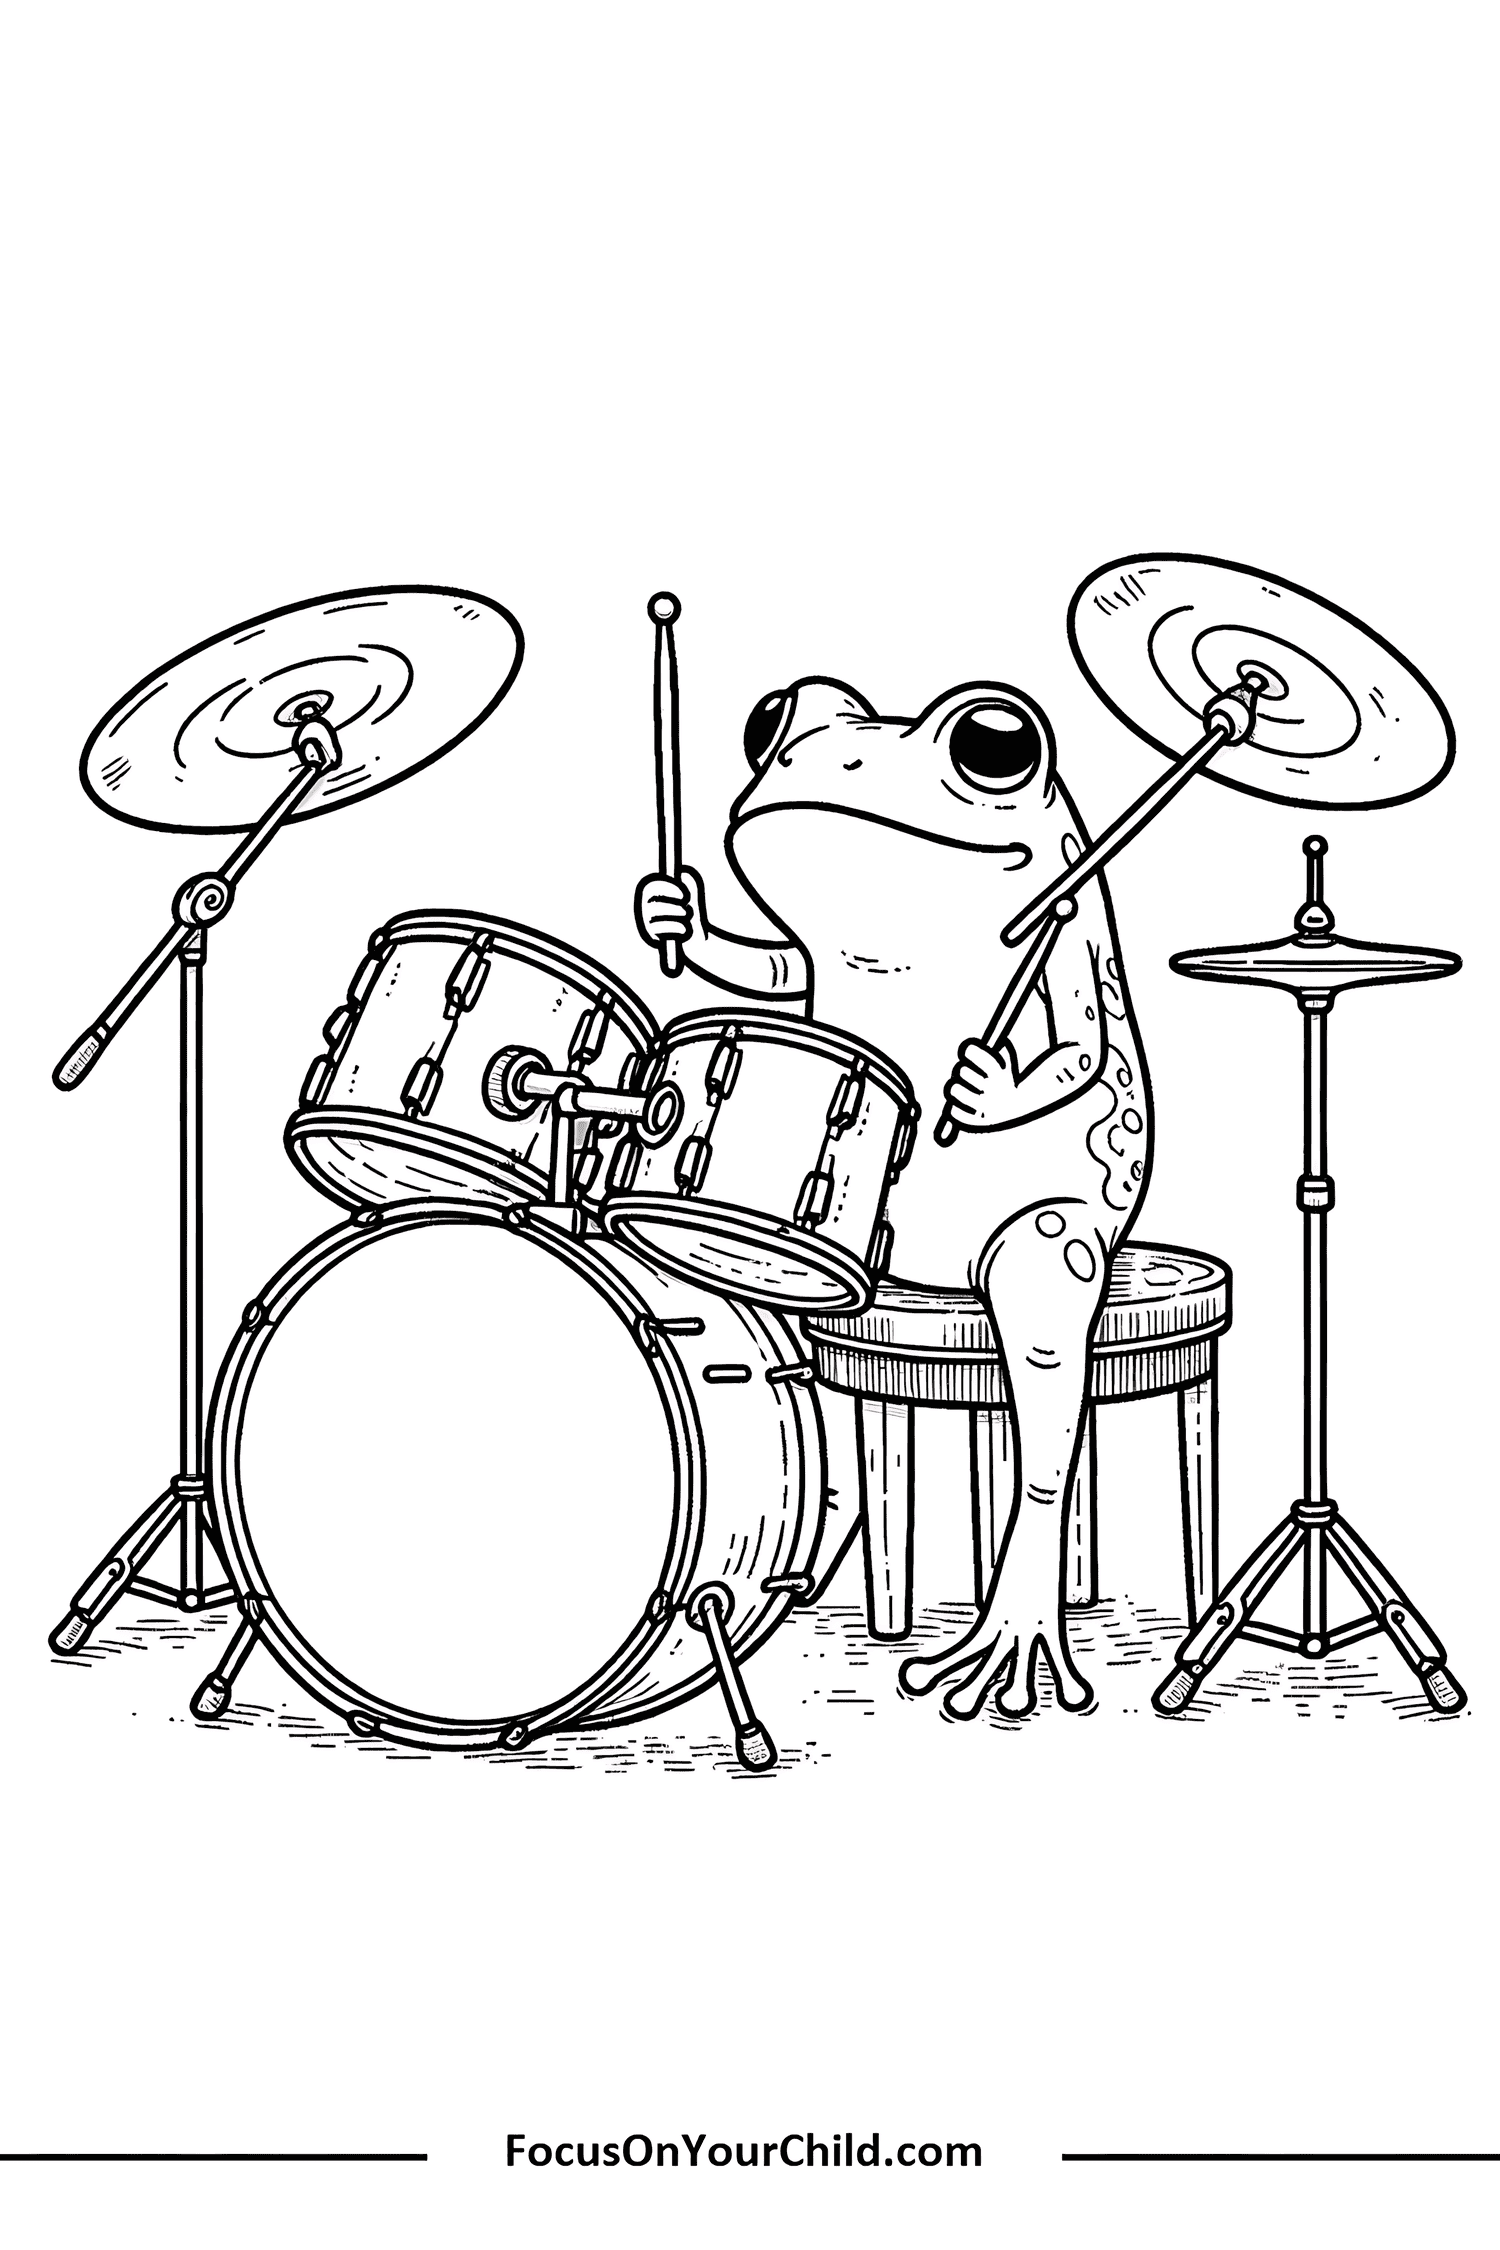 Anthropomorphic frog playing drum set with detailed drum kit in black-and-white illustration.